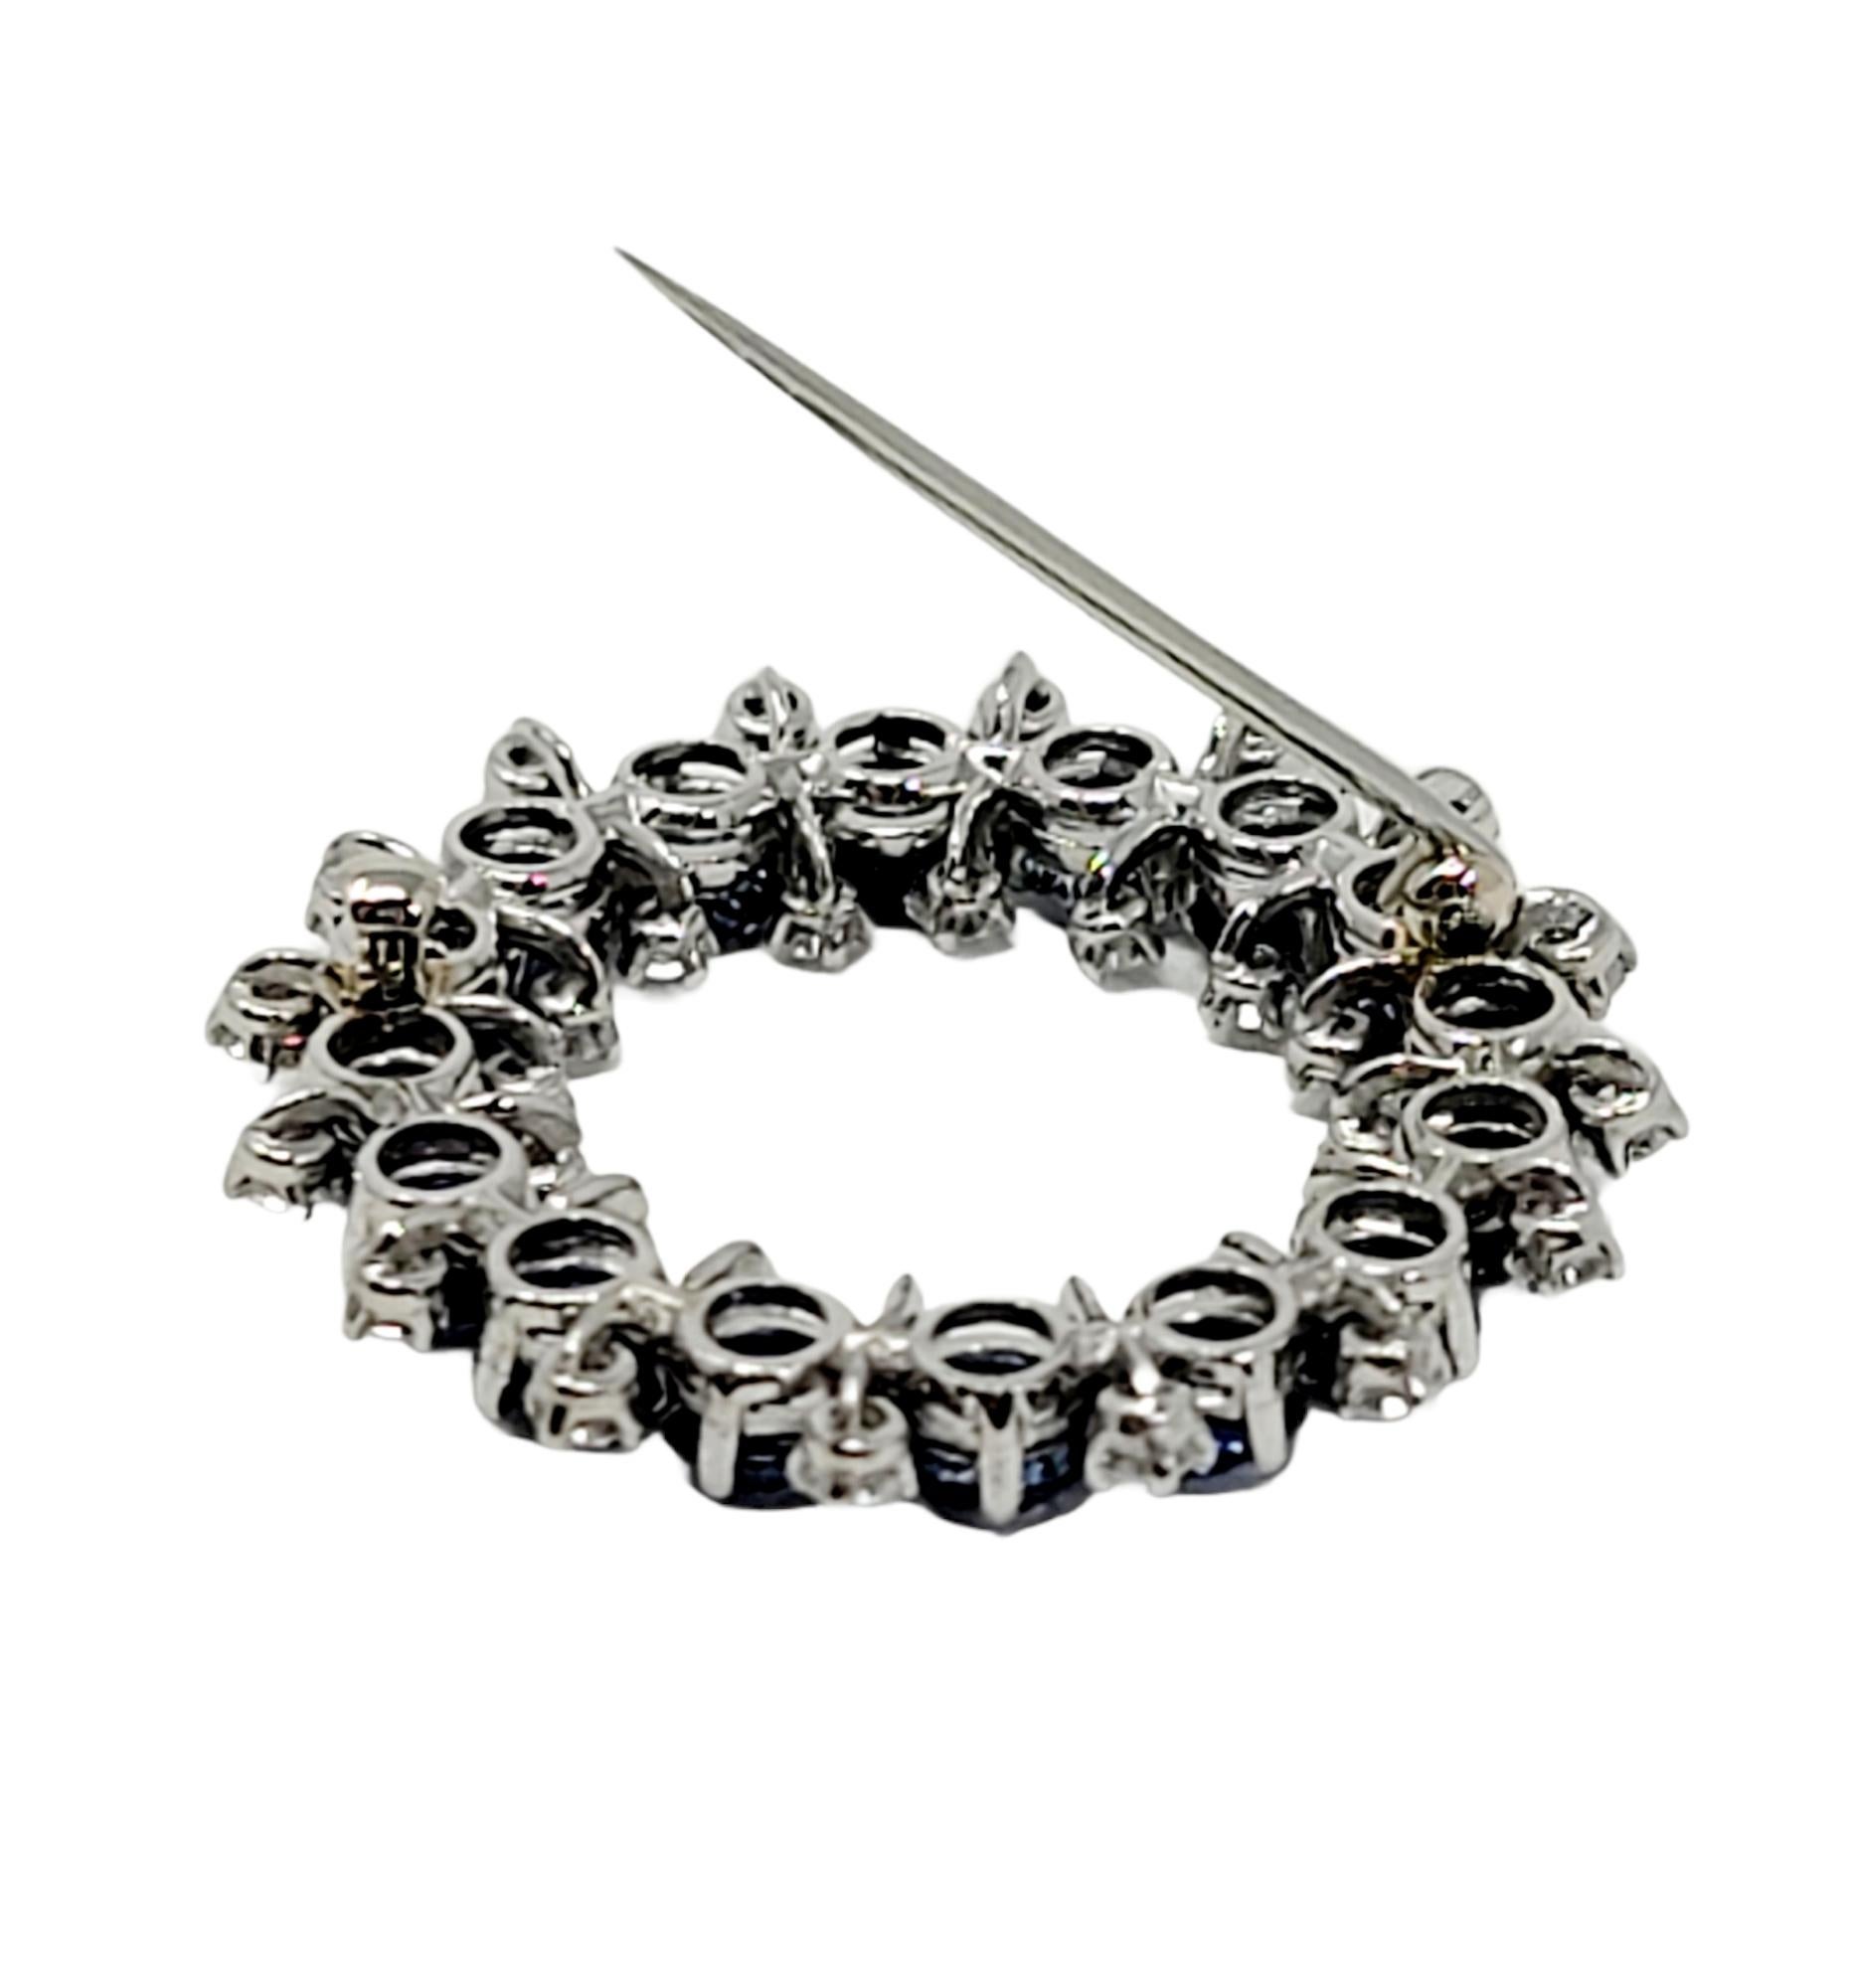 8.17 Carats Total Sapphire and Diamond Open Circle Wreath Brooch in Platinum 1